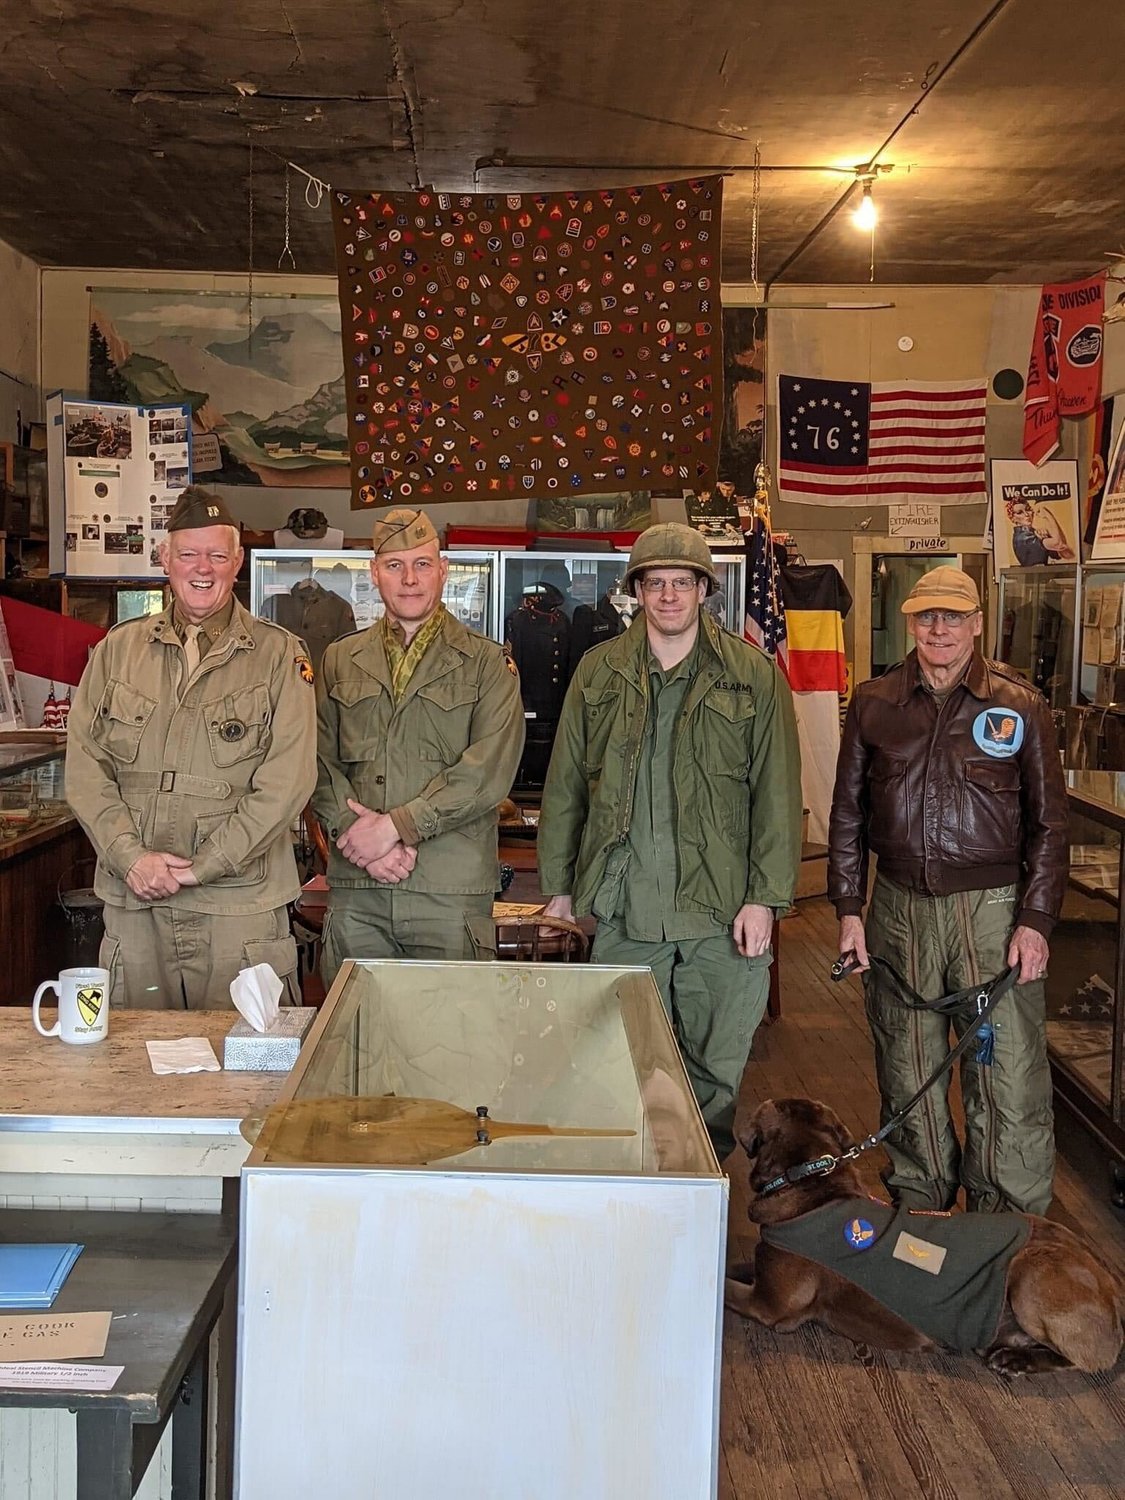 America’s Team Military Museum, located at 622 N. Tower Ave. in Centralia, put vehicles and other military items on display Friday and Saturday in honor of Veterans Day.